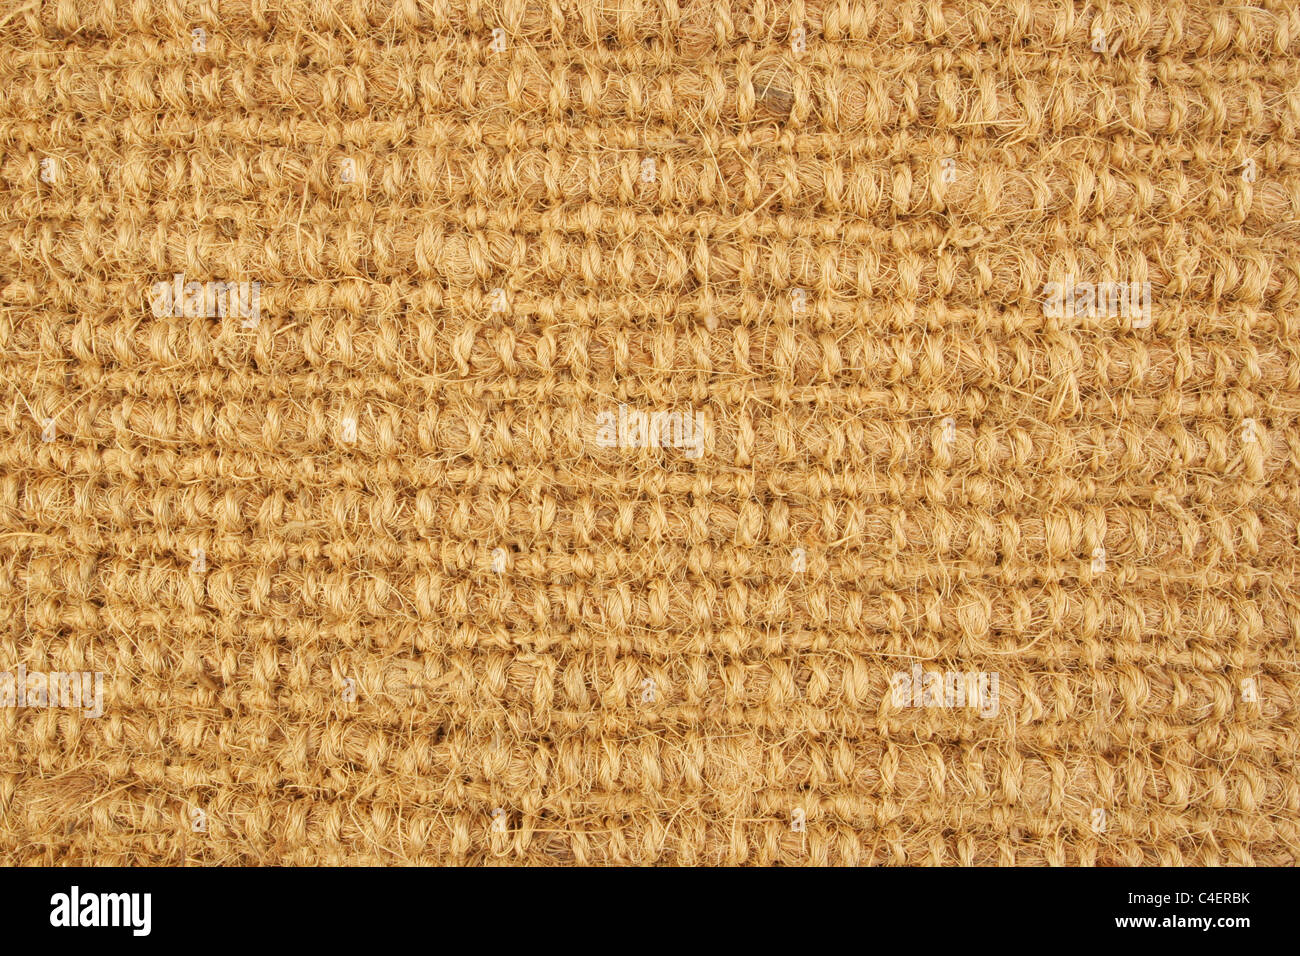 Coir rope door mat as a background and texture Stock Photo